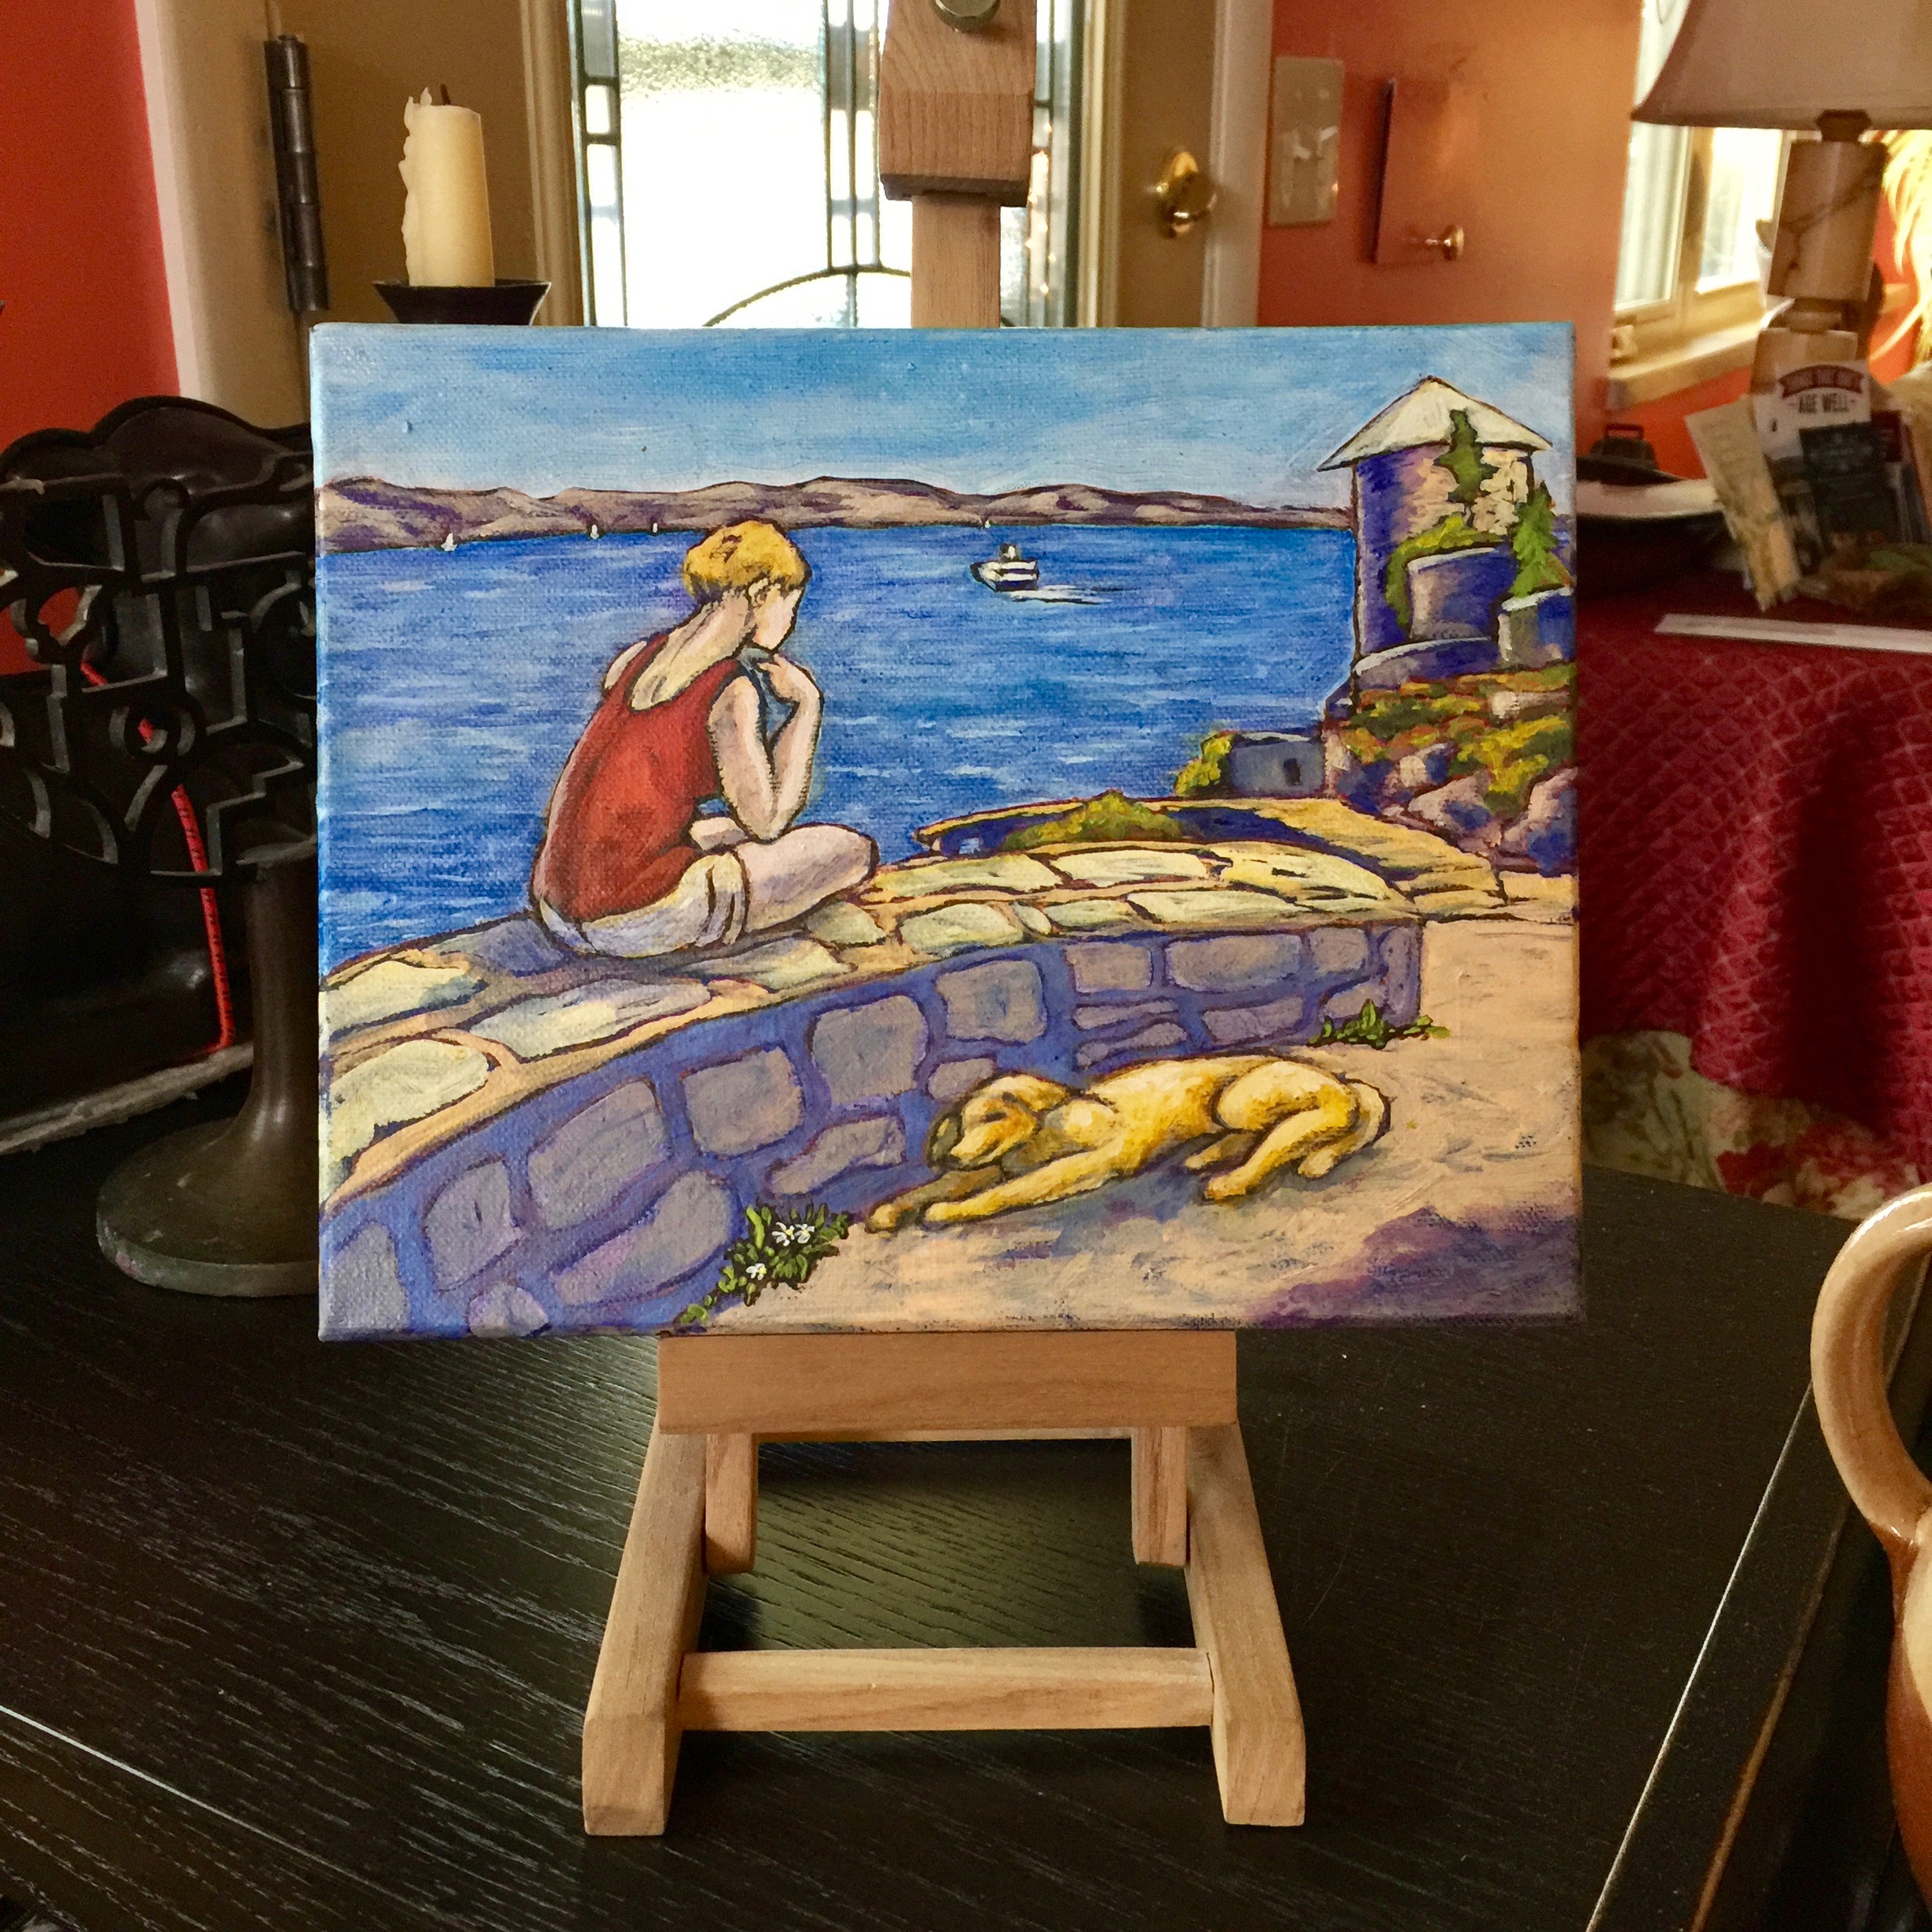 "Girl at Harbor", 8" x 10", as a table top display on little easel, by Marilyn